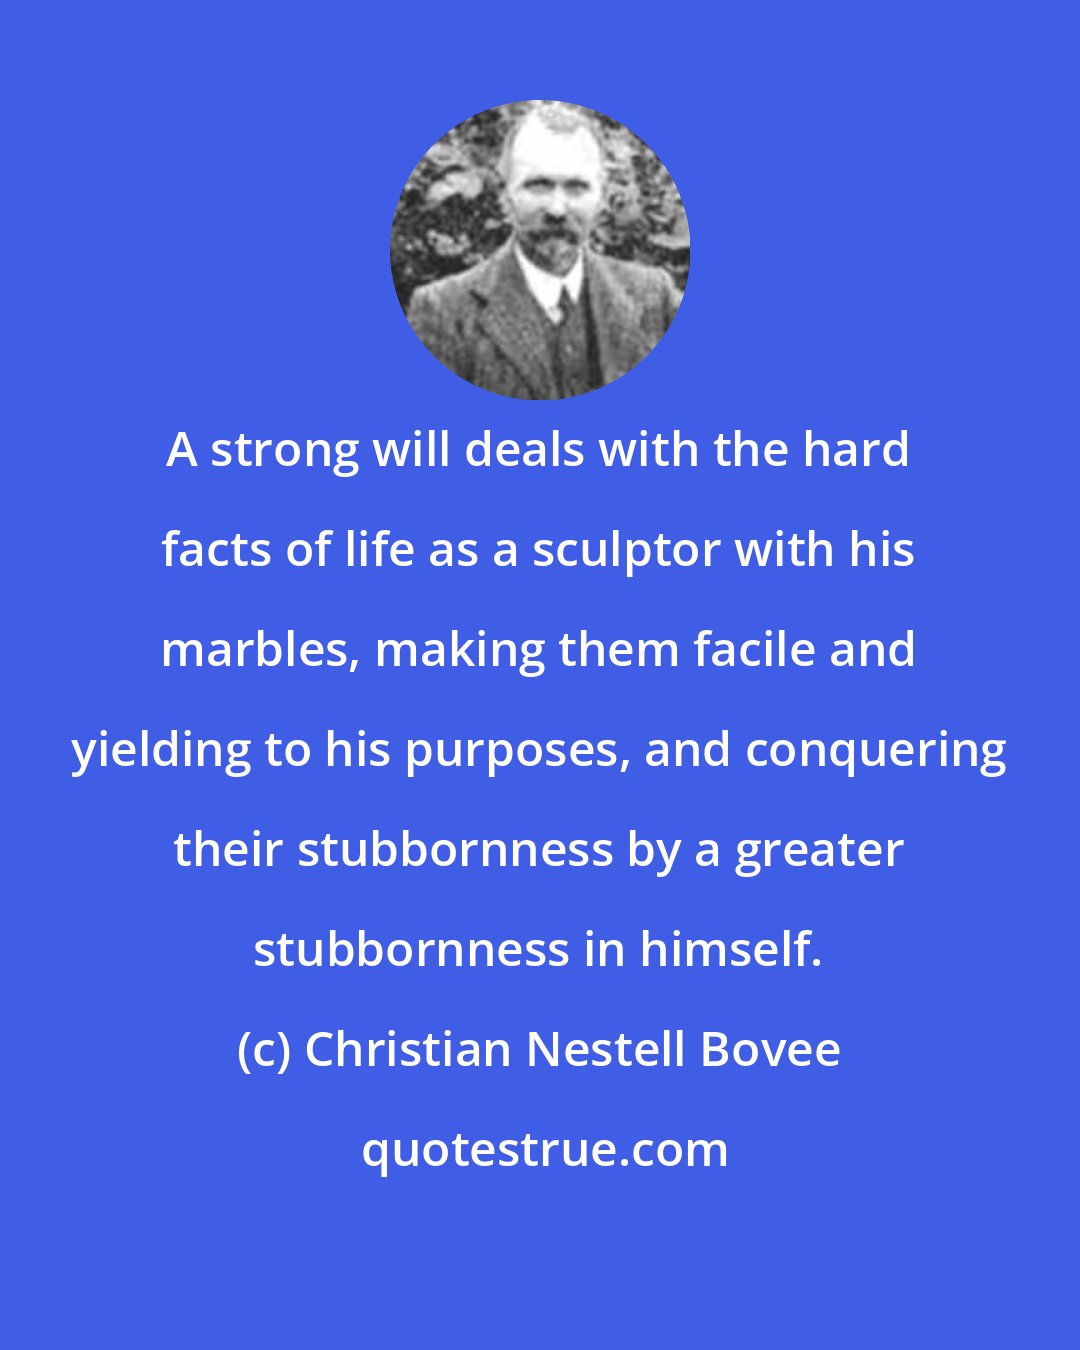 Christian Nestell Bovee: A strong will deals with the hard facts of life as a sculptor with his marbles, making them facile and yielding to his purposes, and conquering their stubbornness by a greater stubbornness in himself.